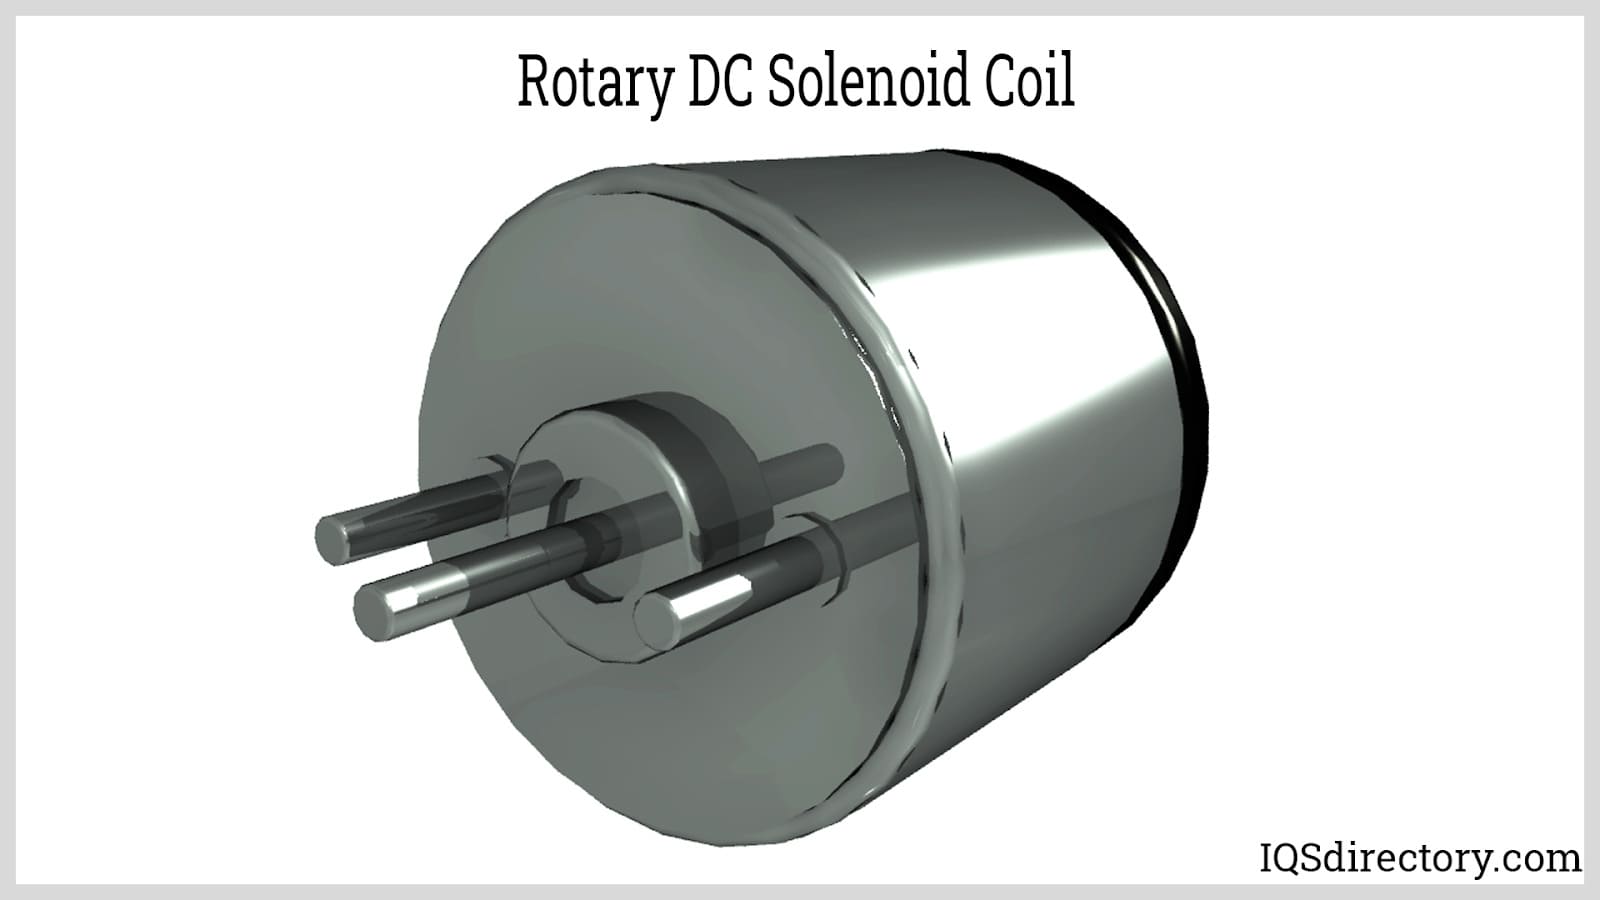 Rotary DC Solenoid Coil